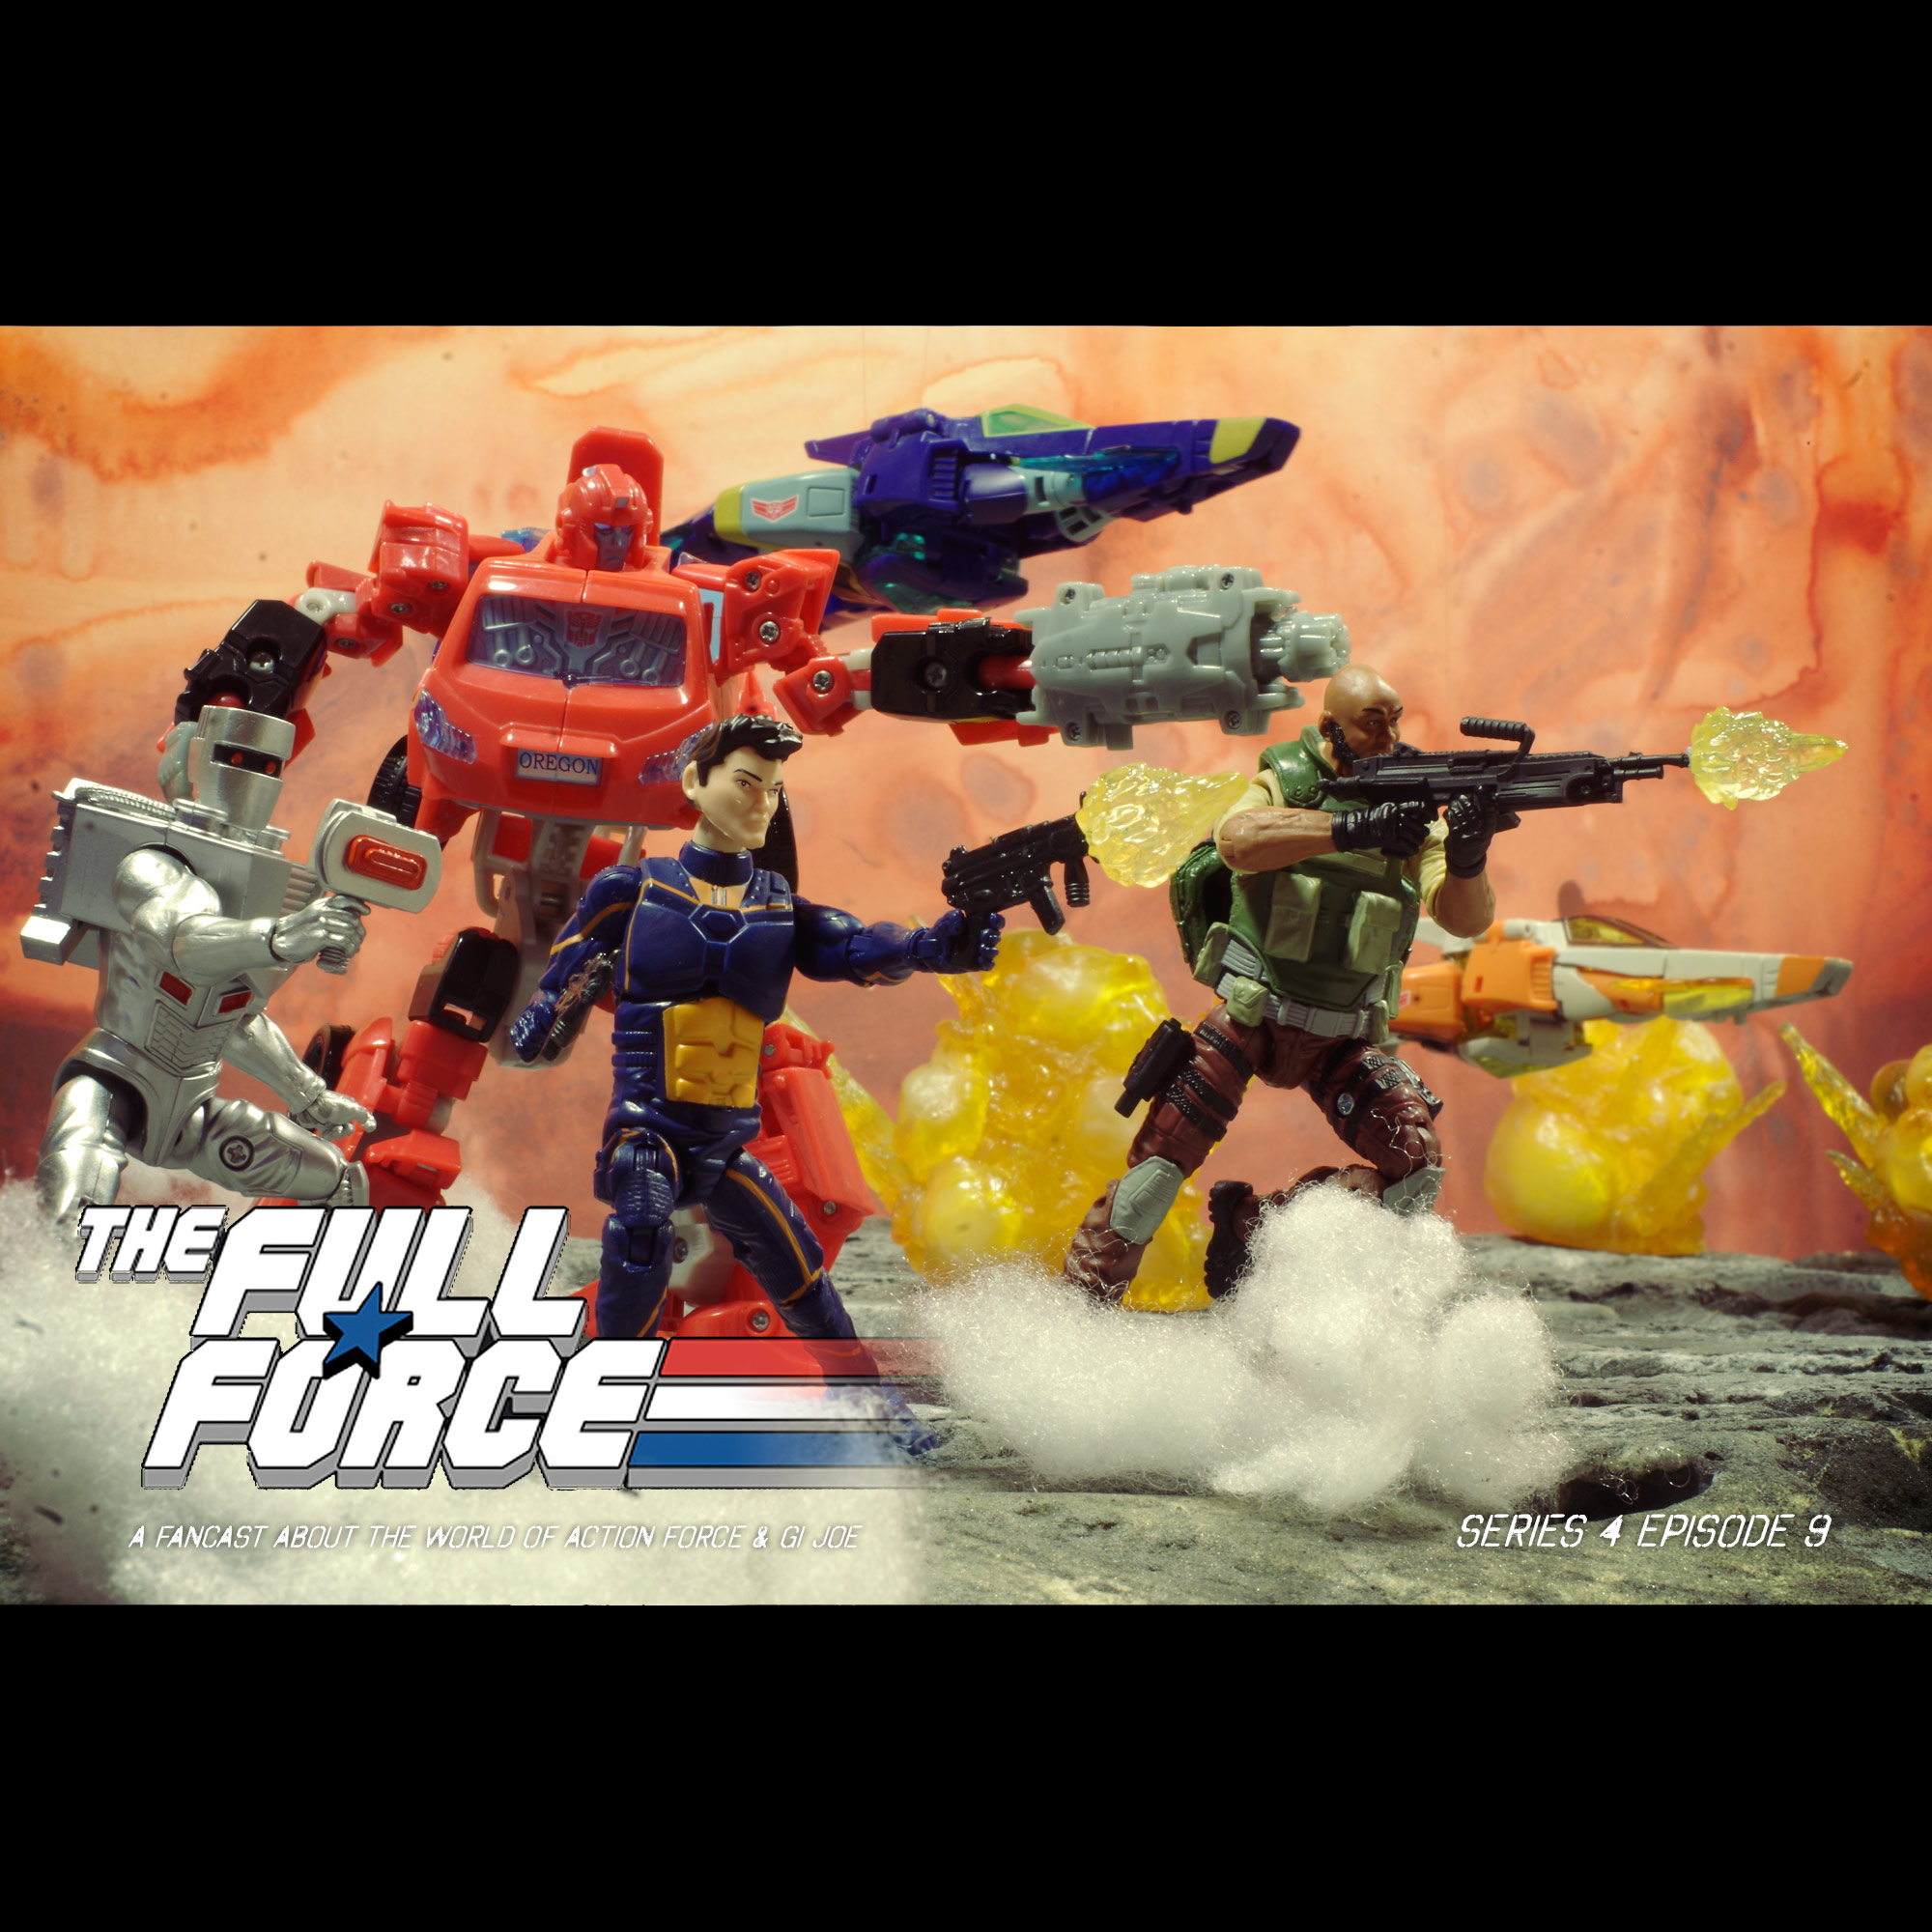 The Full Force Series 4 Episode 9